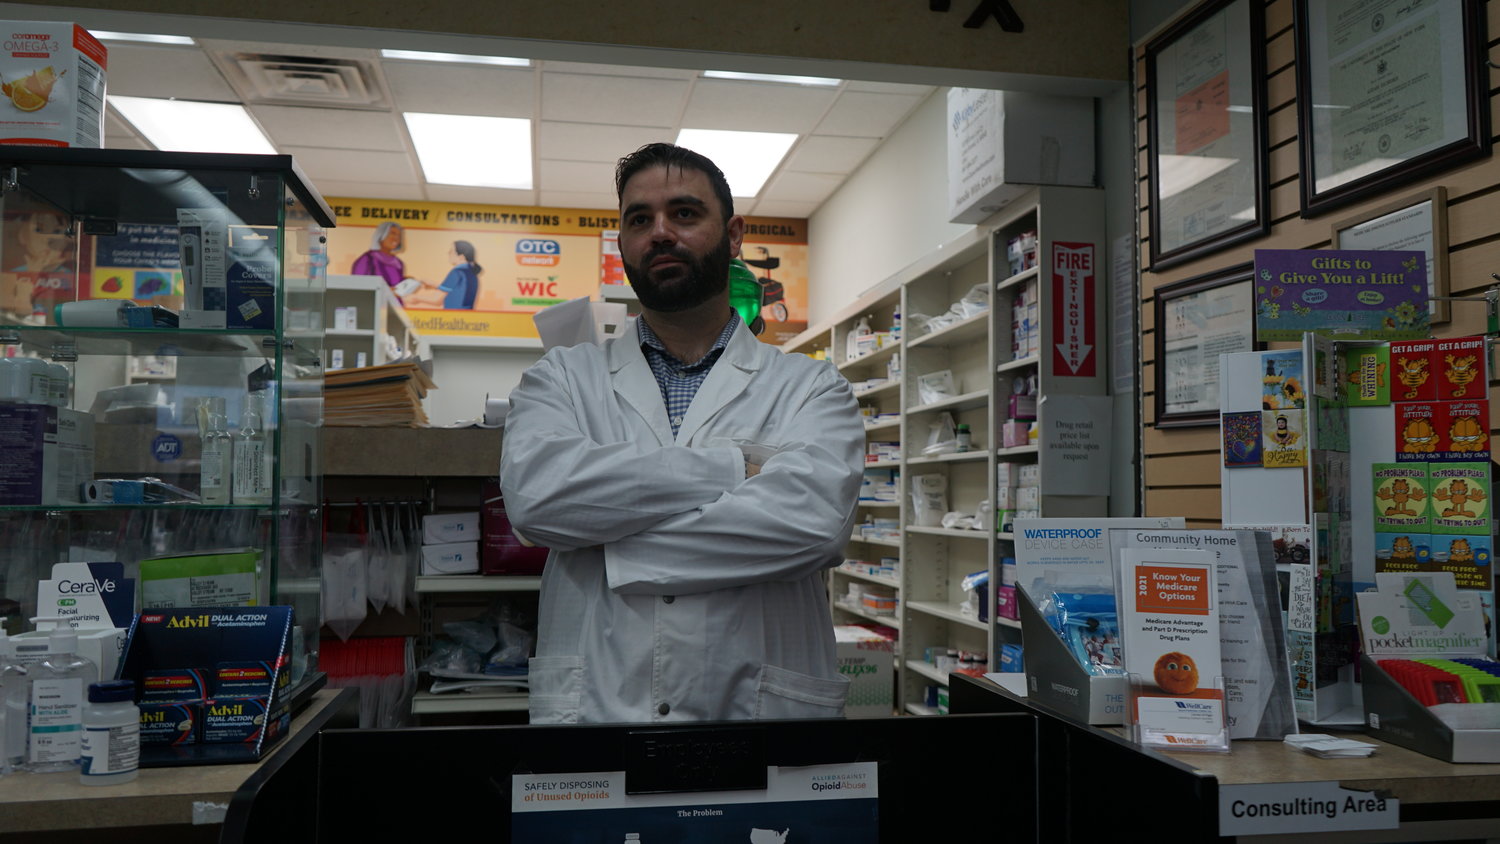 Valley Stream Pharmacy owner and manager Azzam Elcheikh said his shop has received around 100 coronavirus vaccines a week. He hopes to hire additional staff and increase that number.